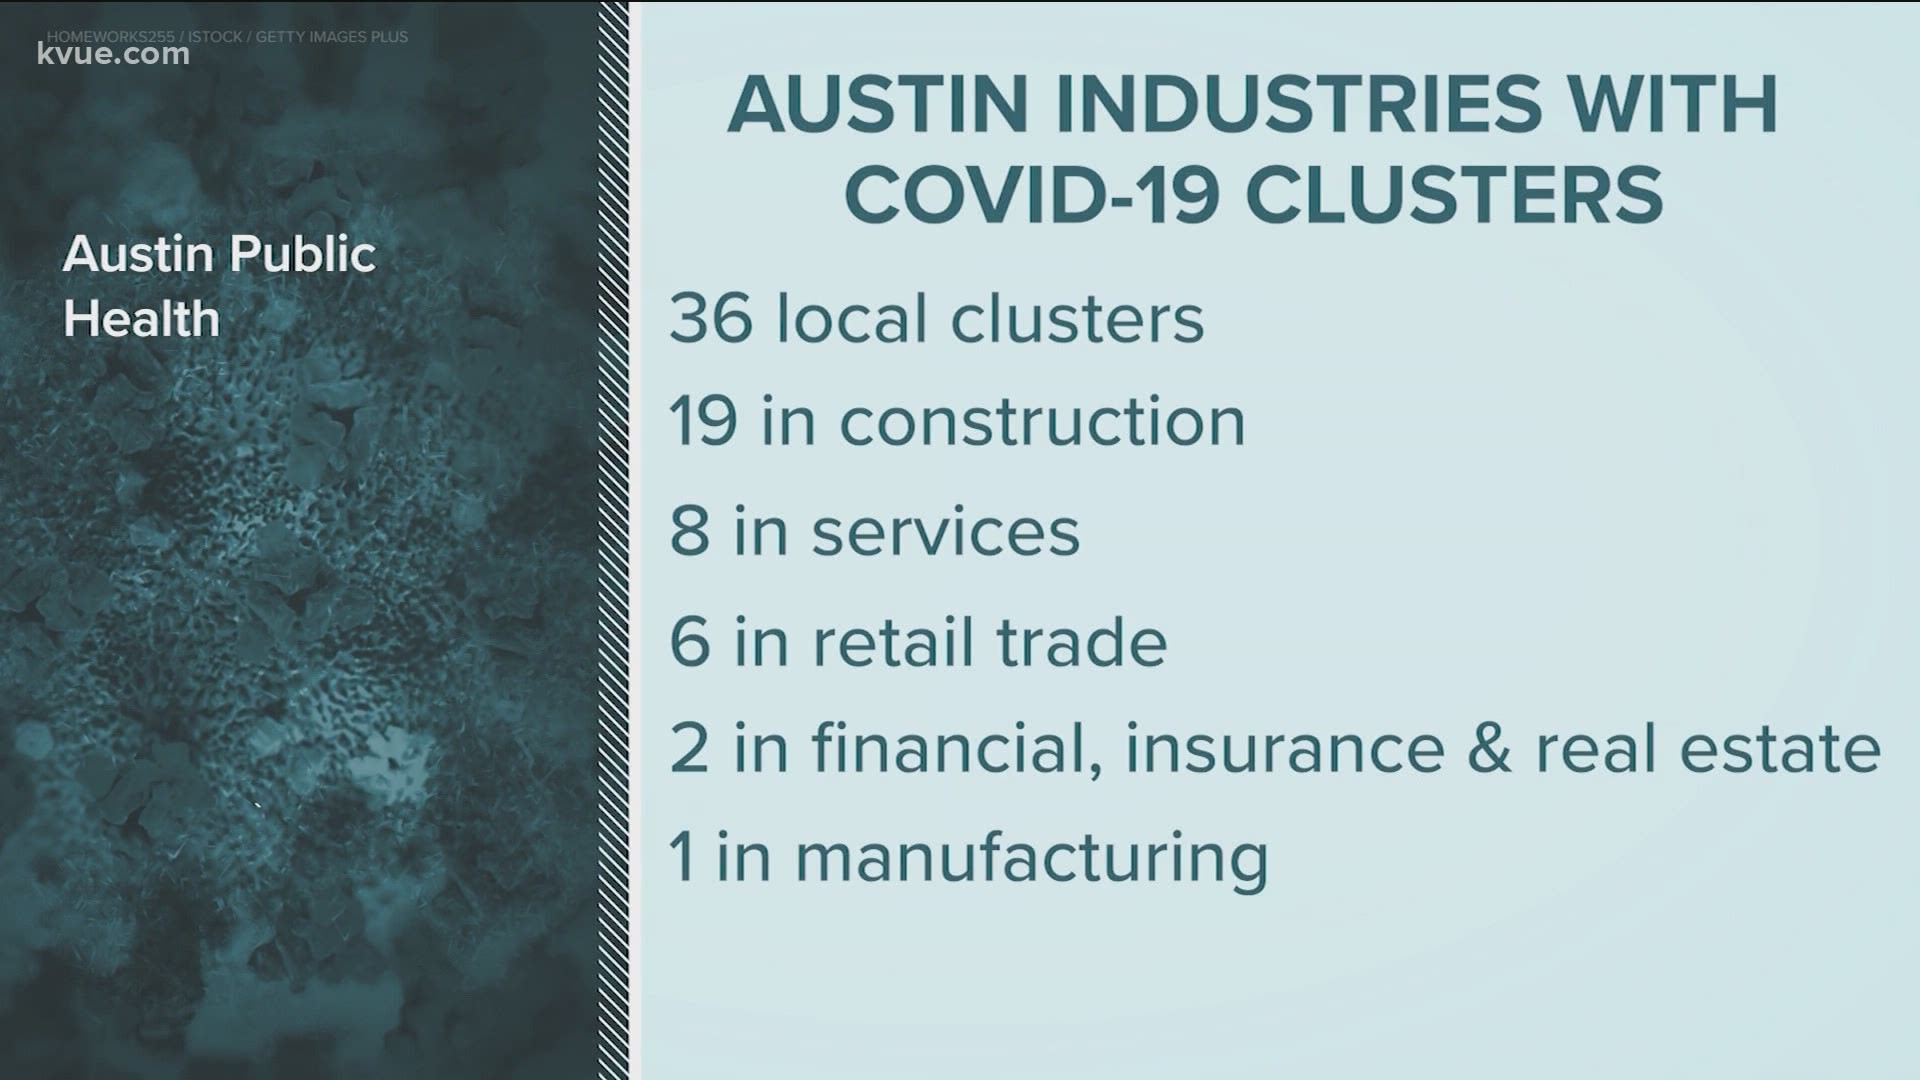 COVID-19 is spreading quickly through some industries in Austin.